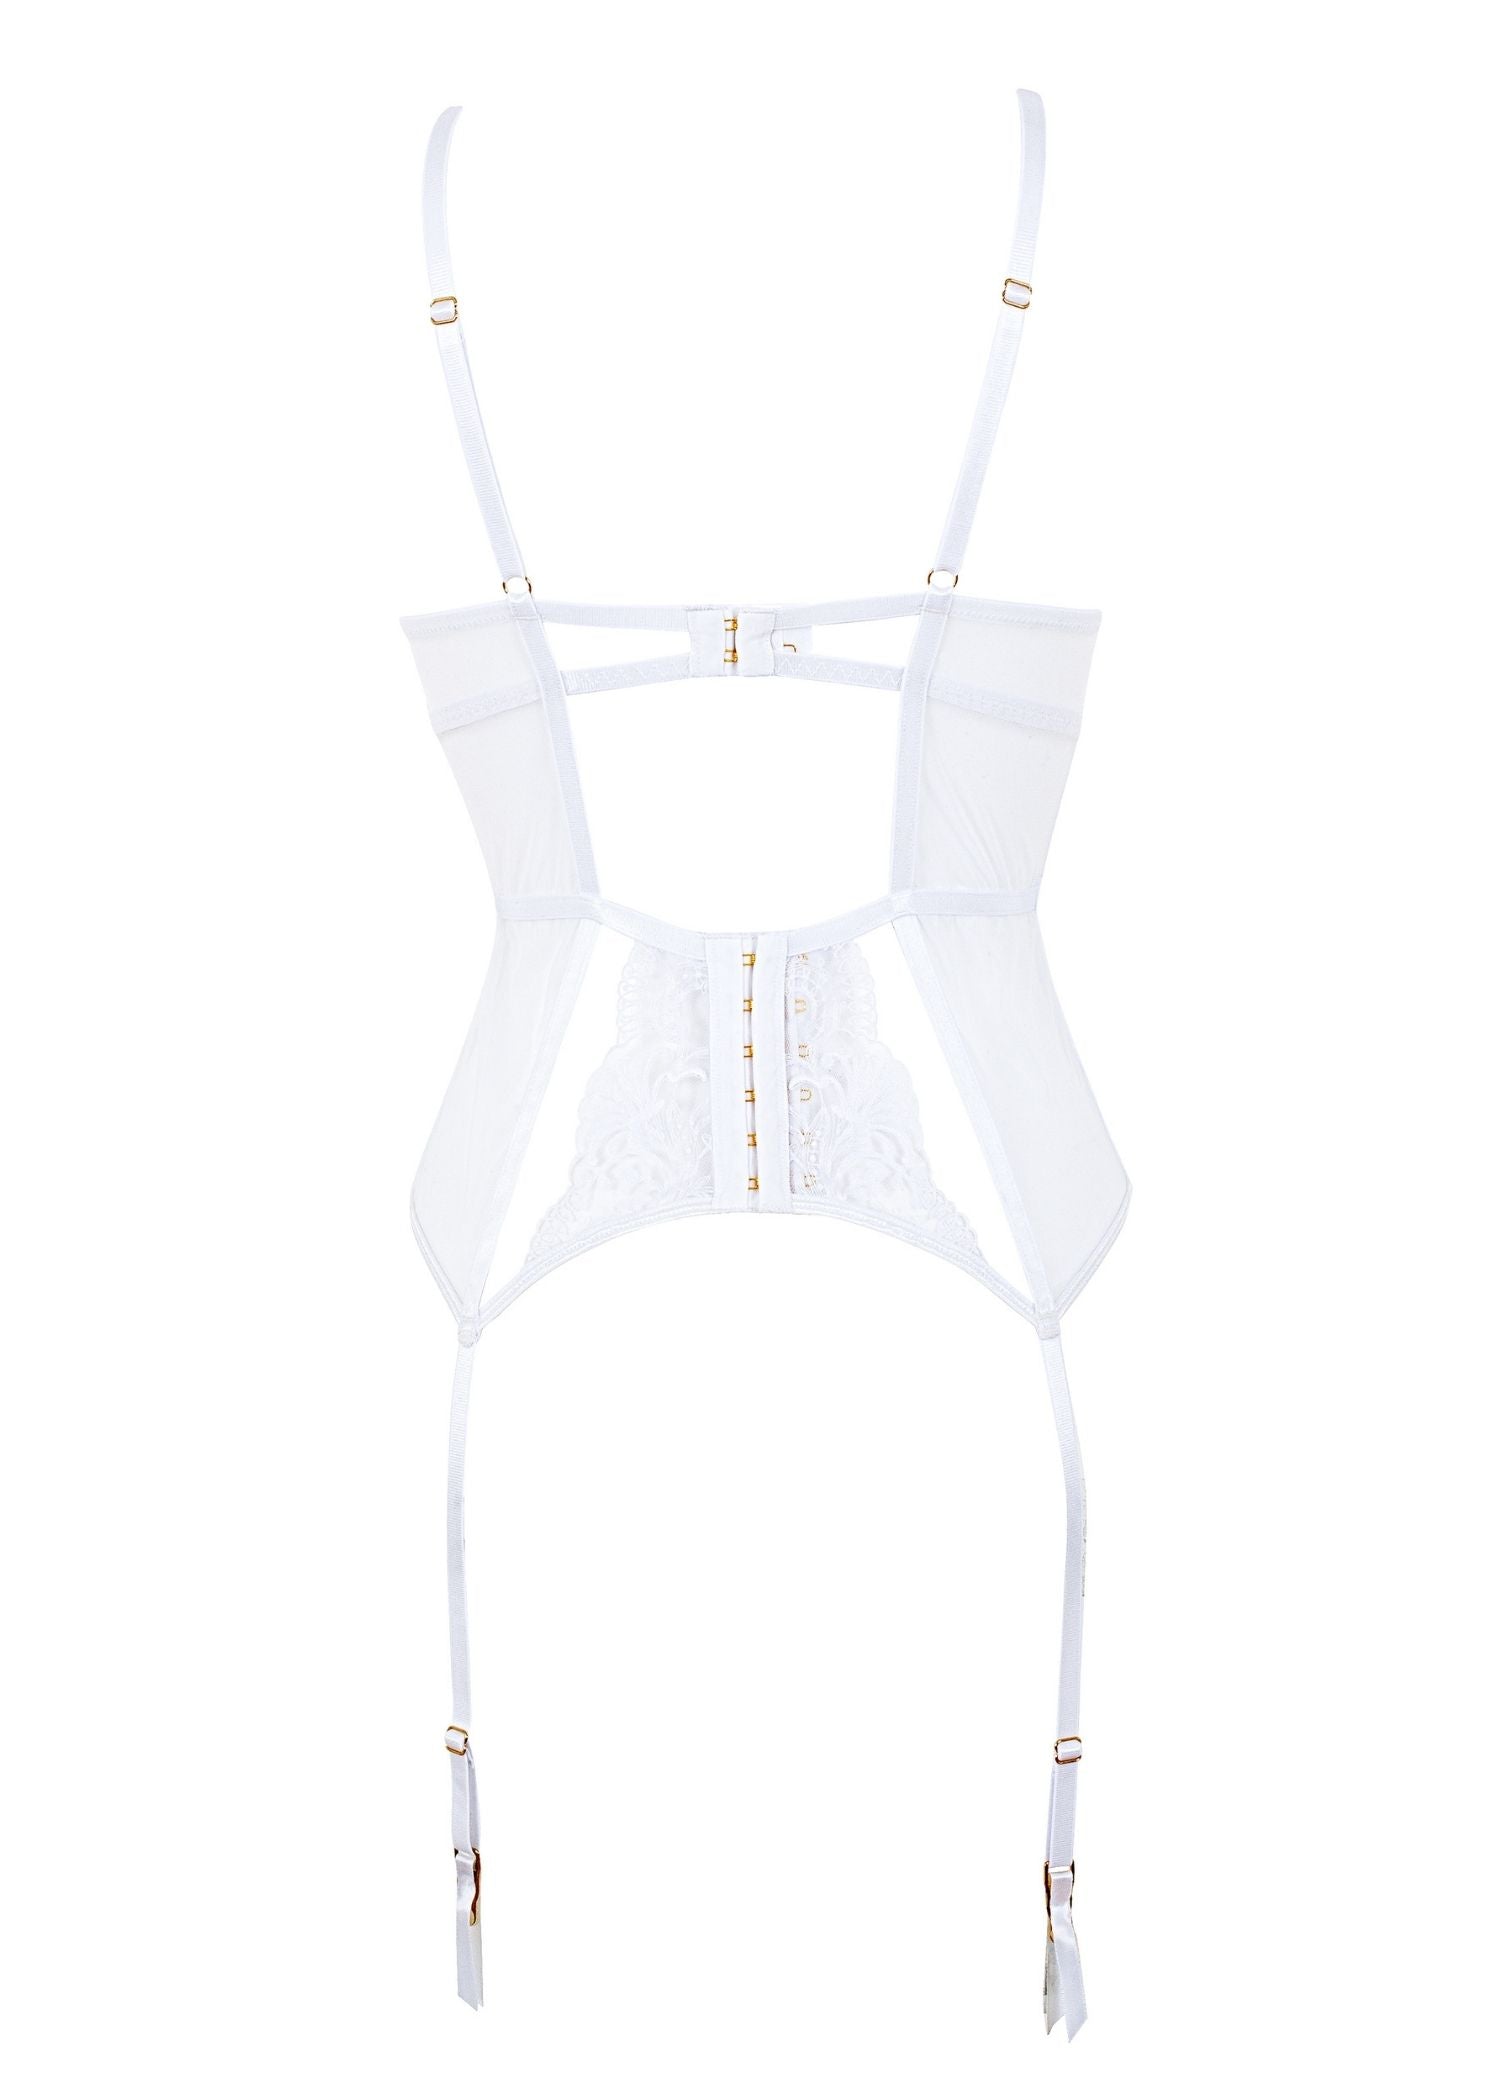 Bluebella Marseille (White) Basque - Underwired Lace Bodysuit - Avec Amour Sexy Lingerie